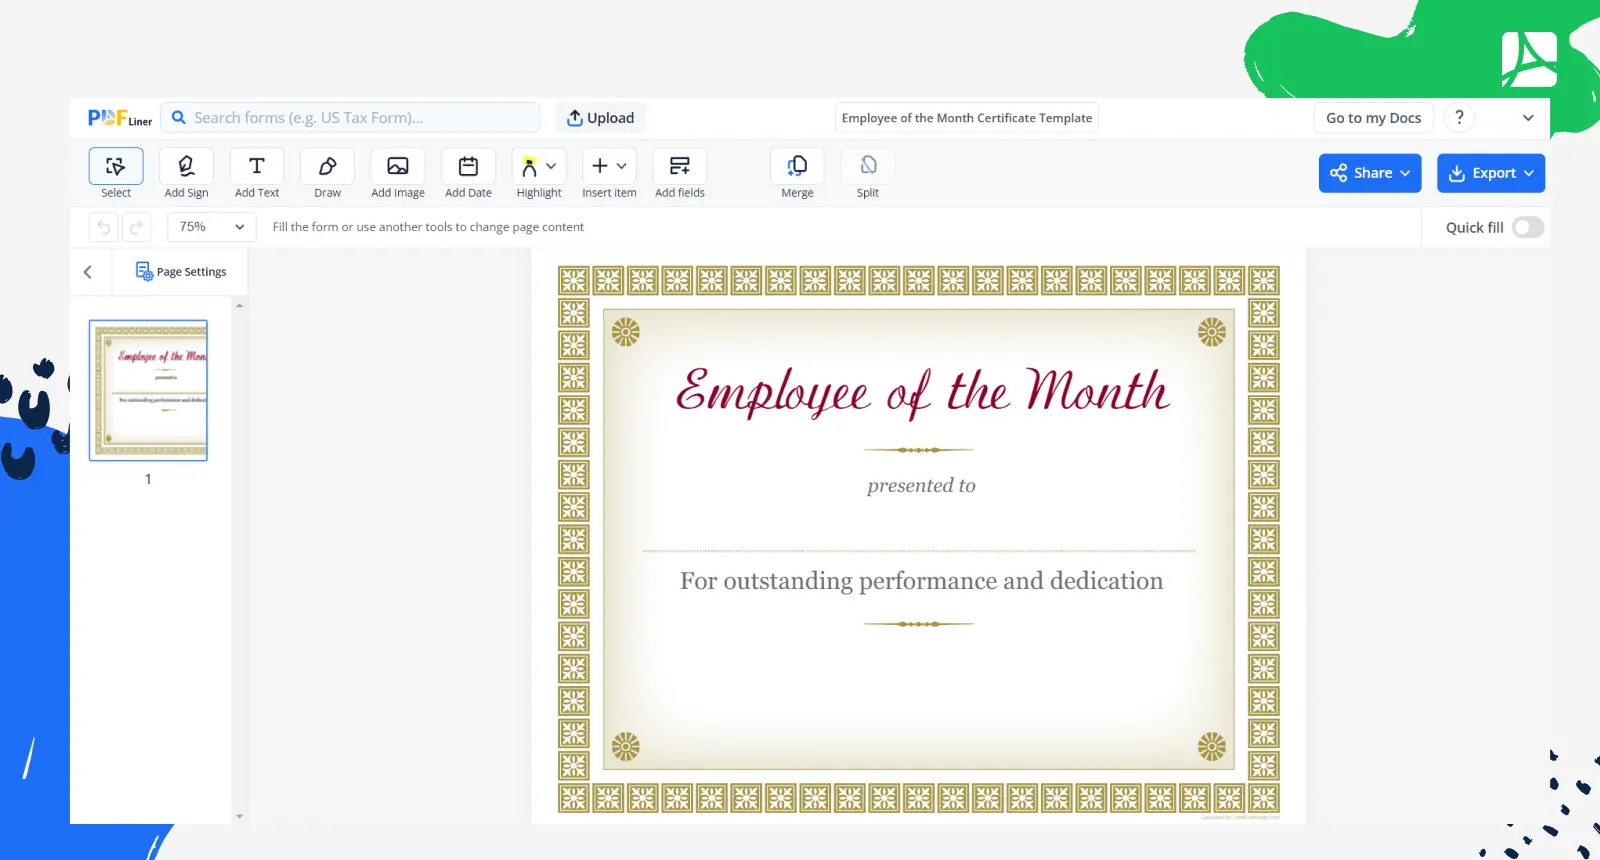 Employee of the Month Certificate Template Screenshot